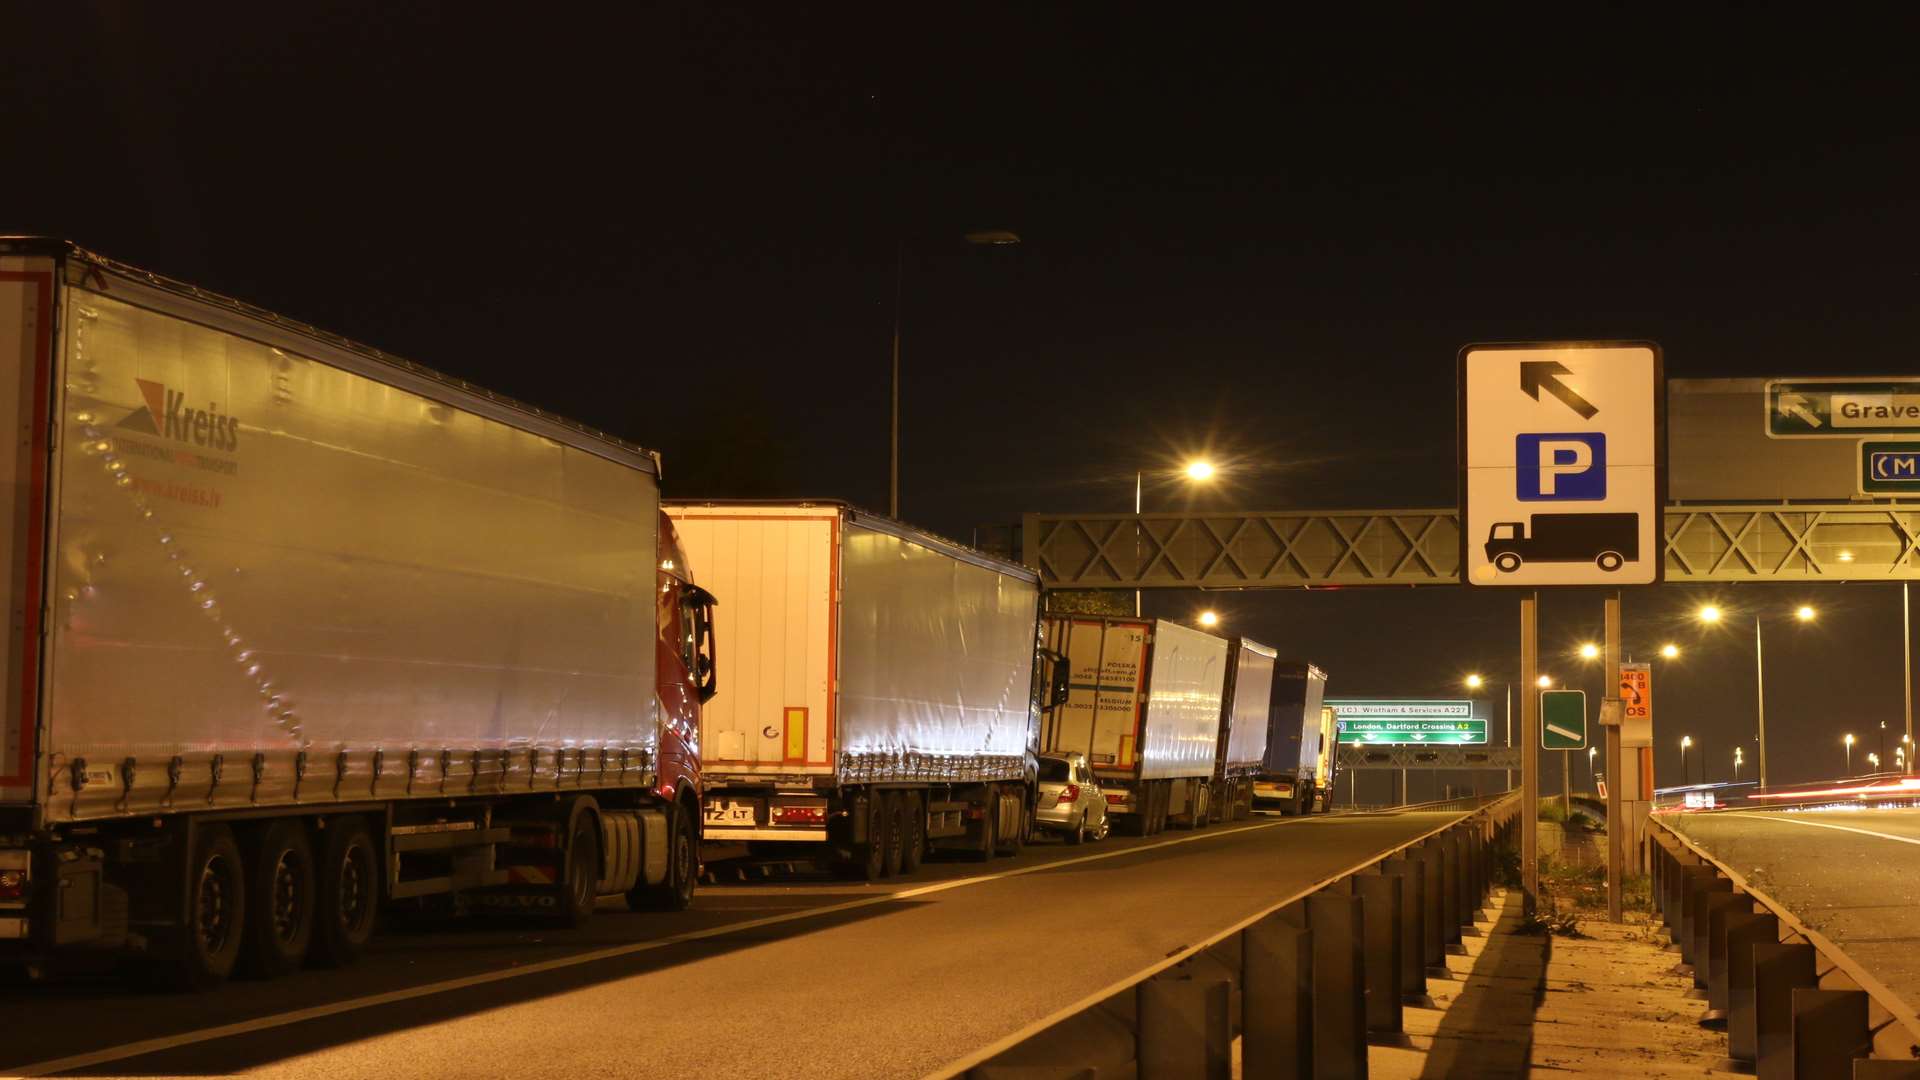 Lorries continue to flout road laws by parking on the slip roads at Gravesend East